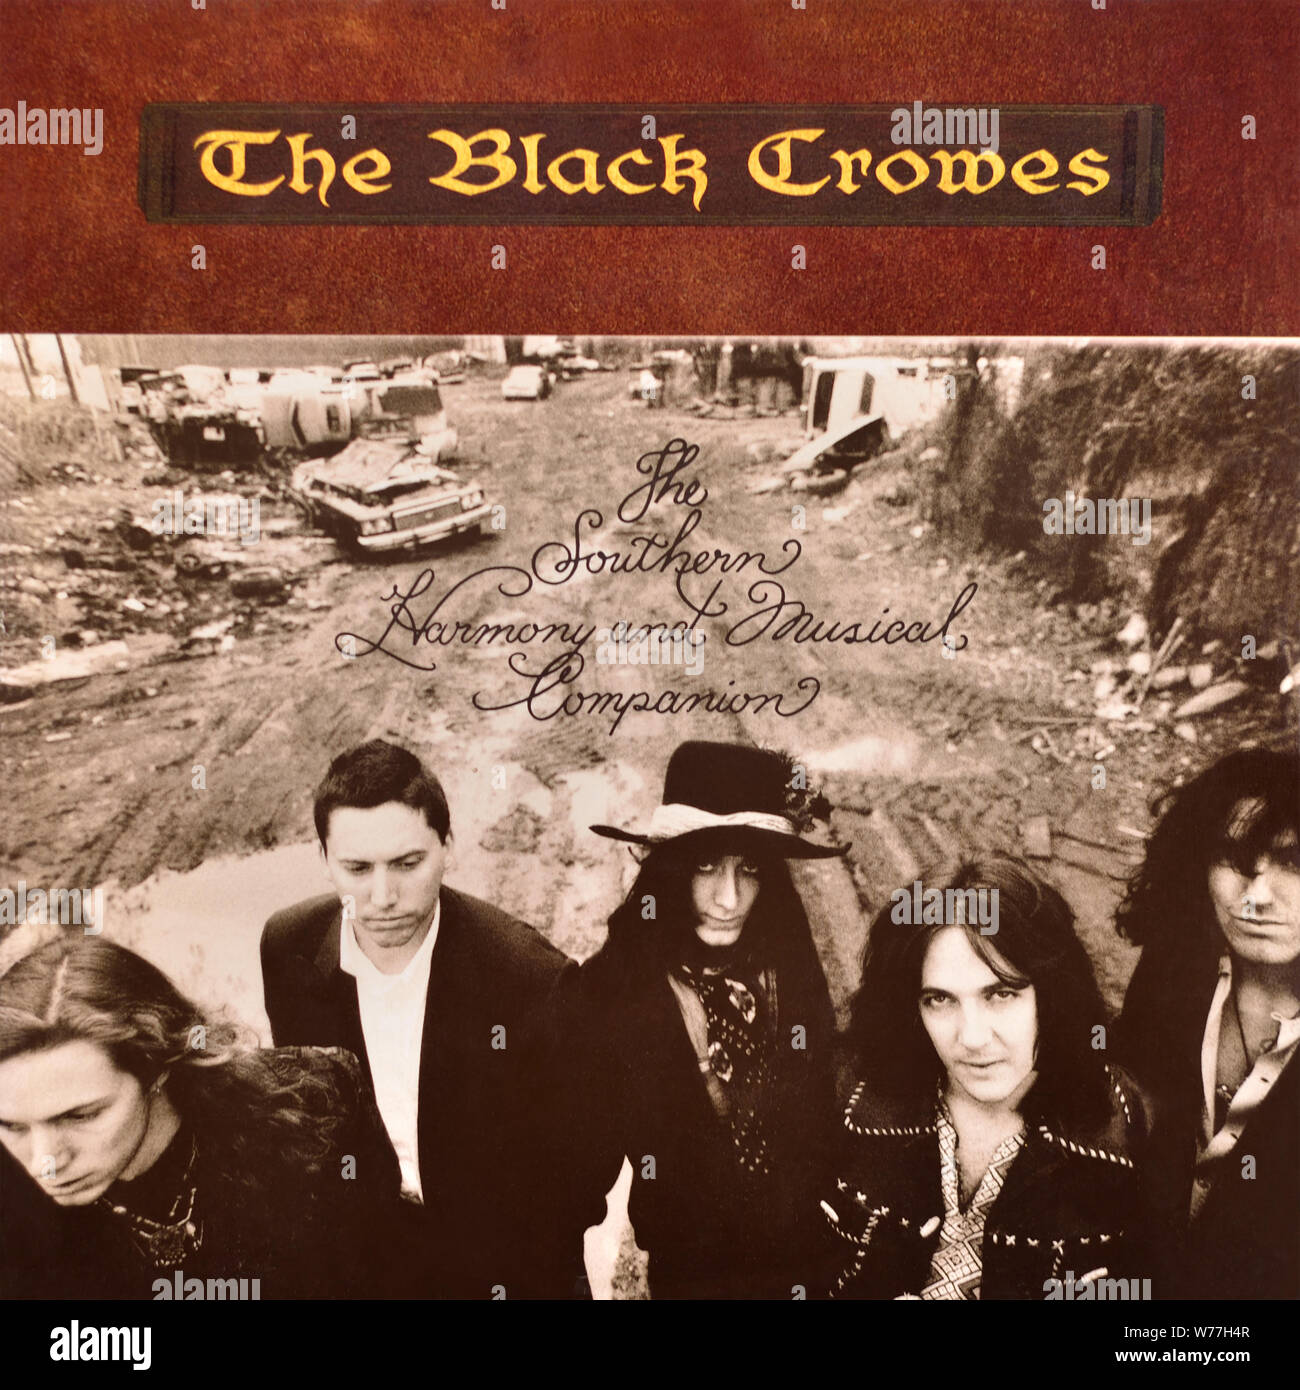 The Black Crowes - original vinyl album cover - The Southern Harmony And Musical Companion - 1992 Stock Photo